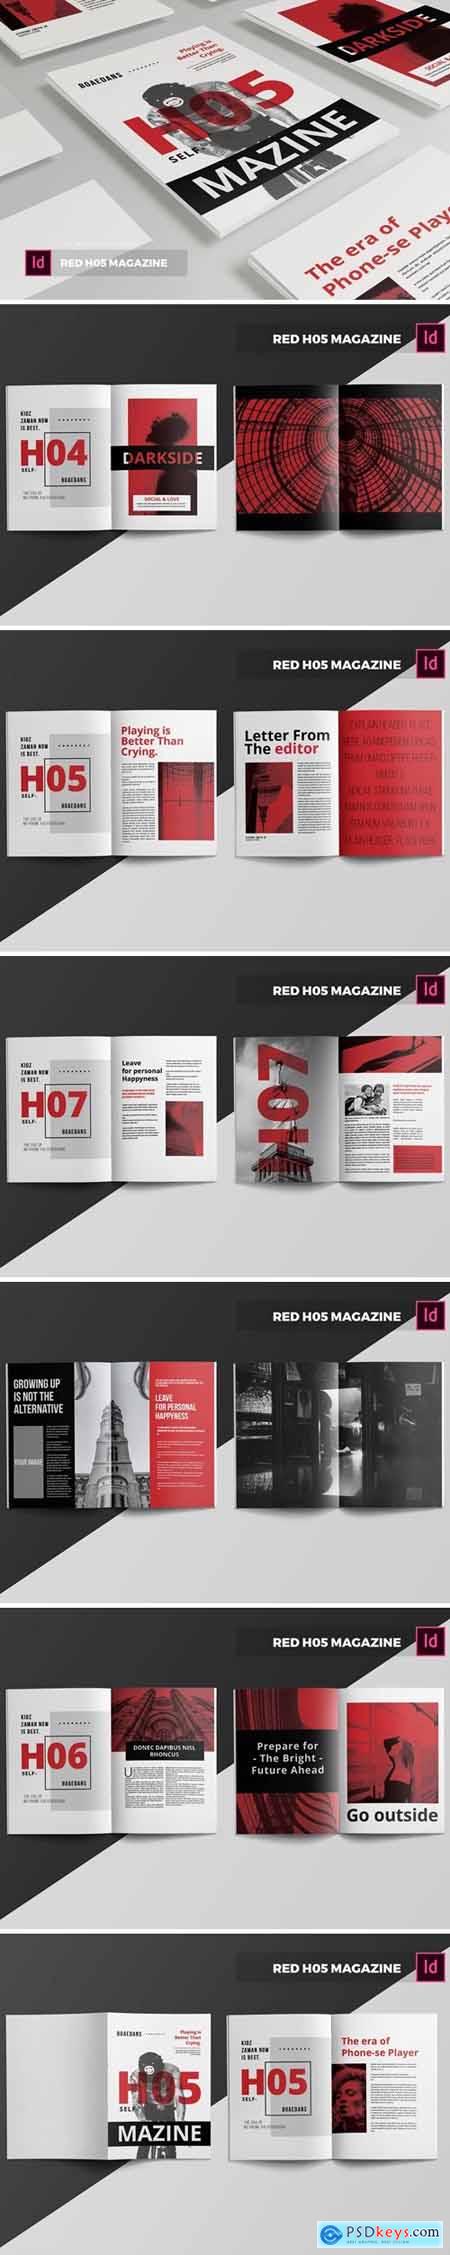 Red H05 Magazine Template